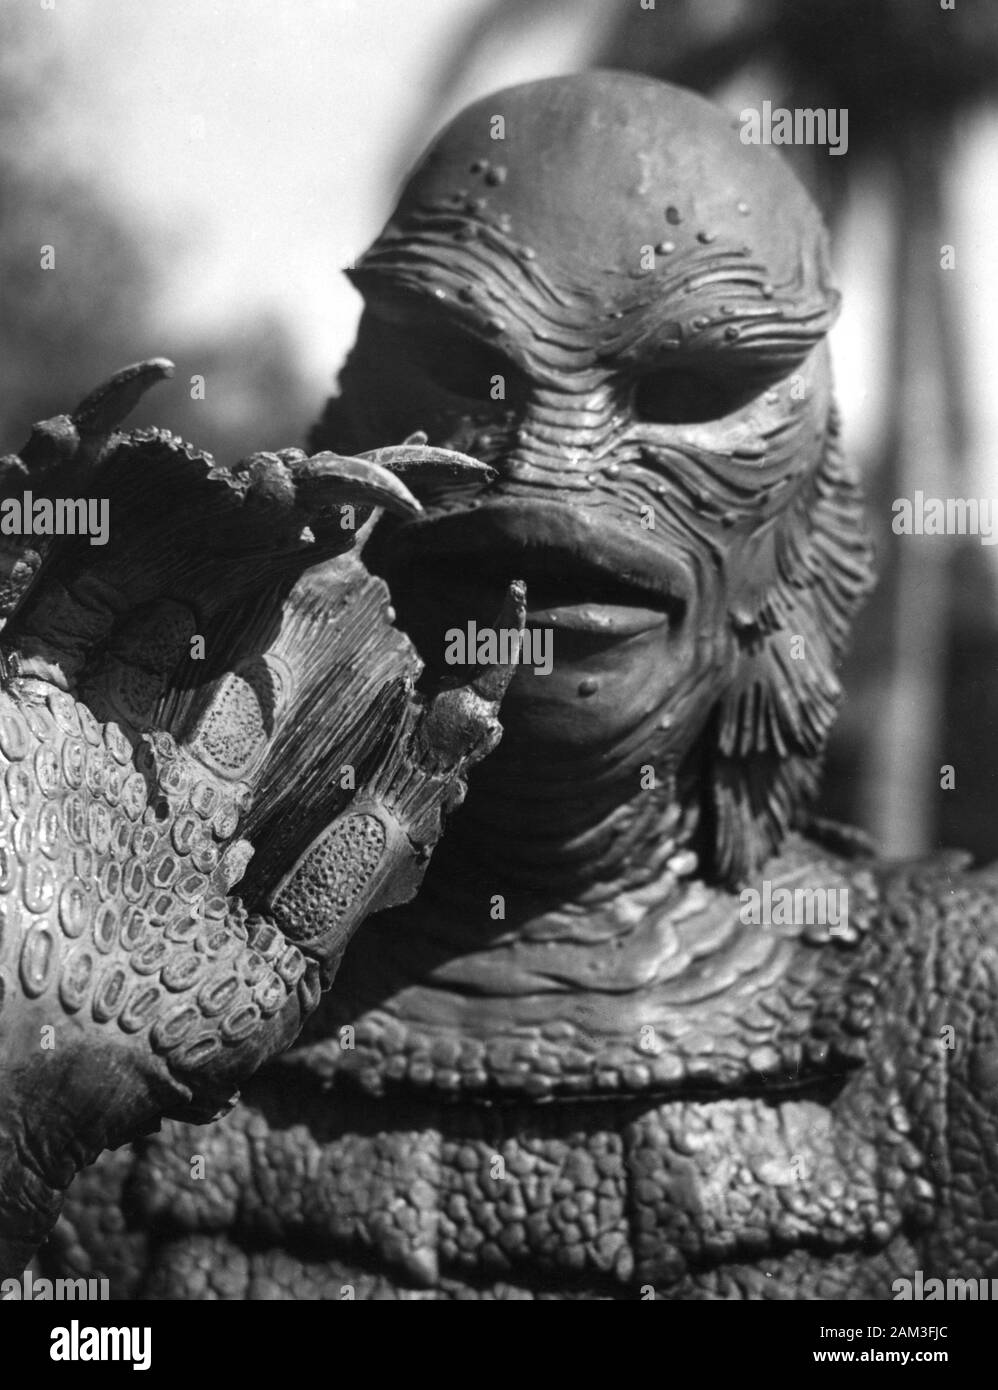 THE GILL MAN from CREATURE FROM THE BLACK LAGOON 1954 director JACK ARNOLD filmed in 3D producer William Alland Universal International Pictures (UI) Stock Photo